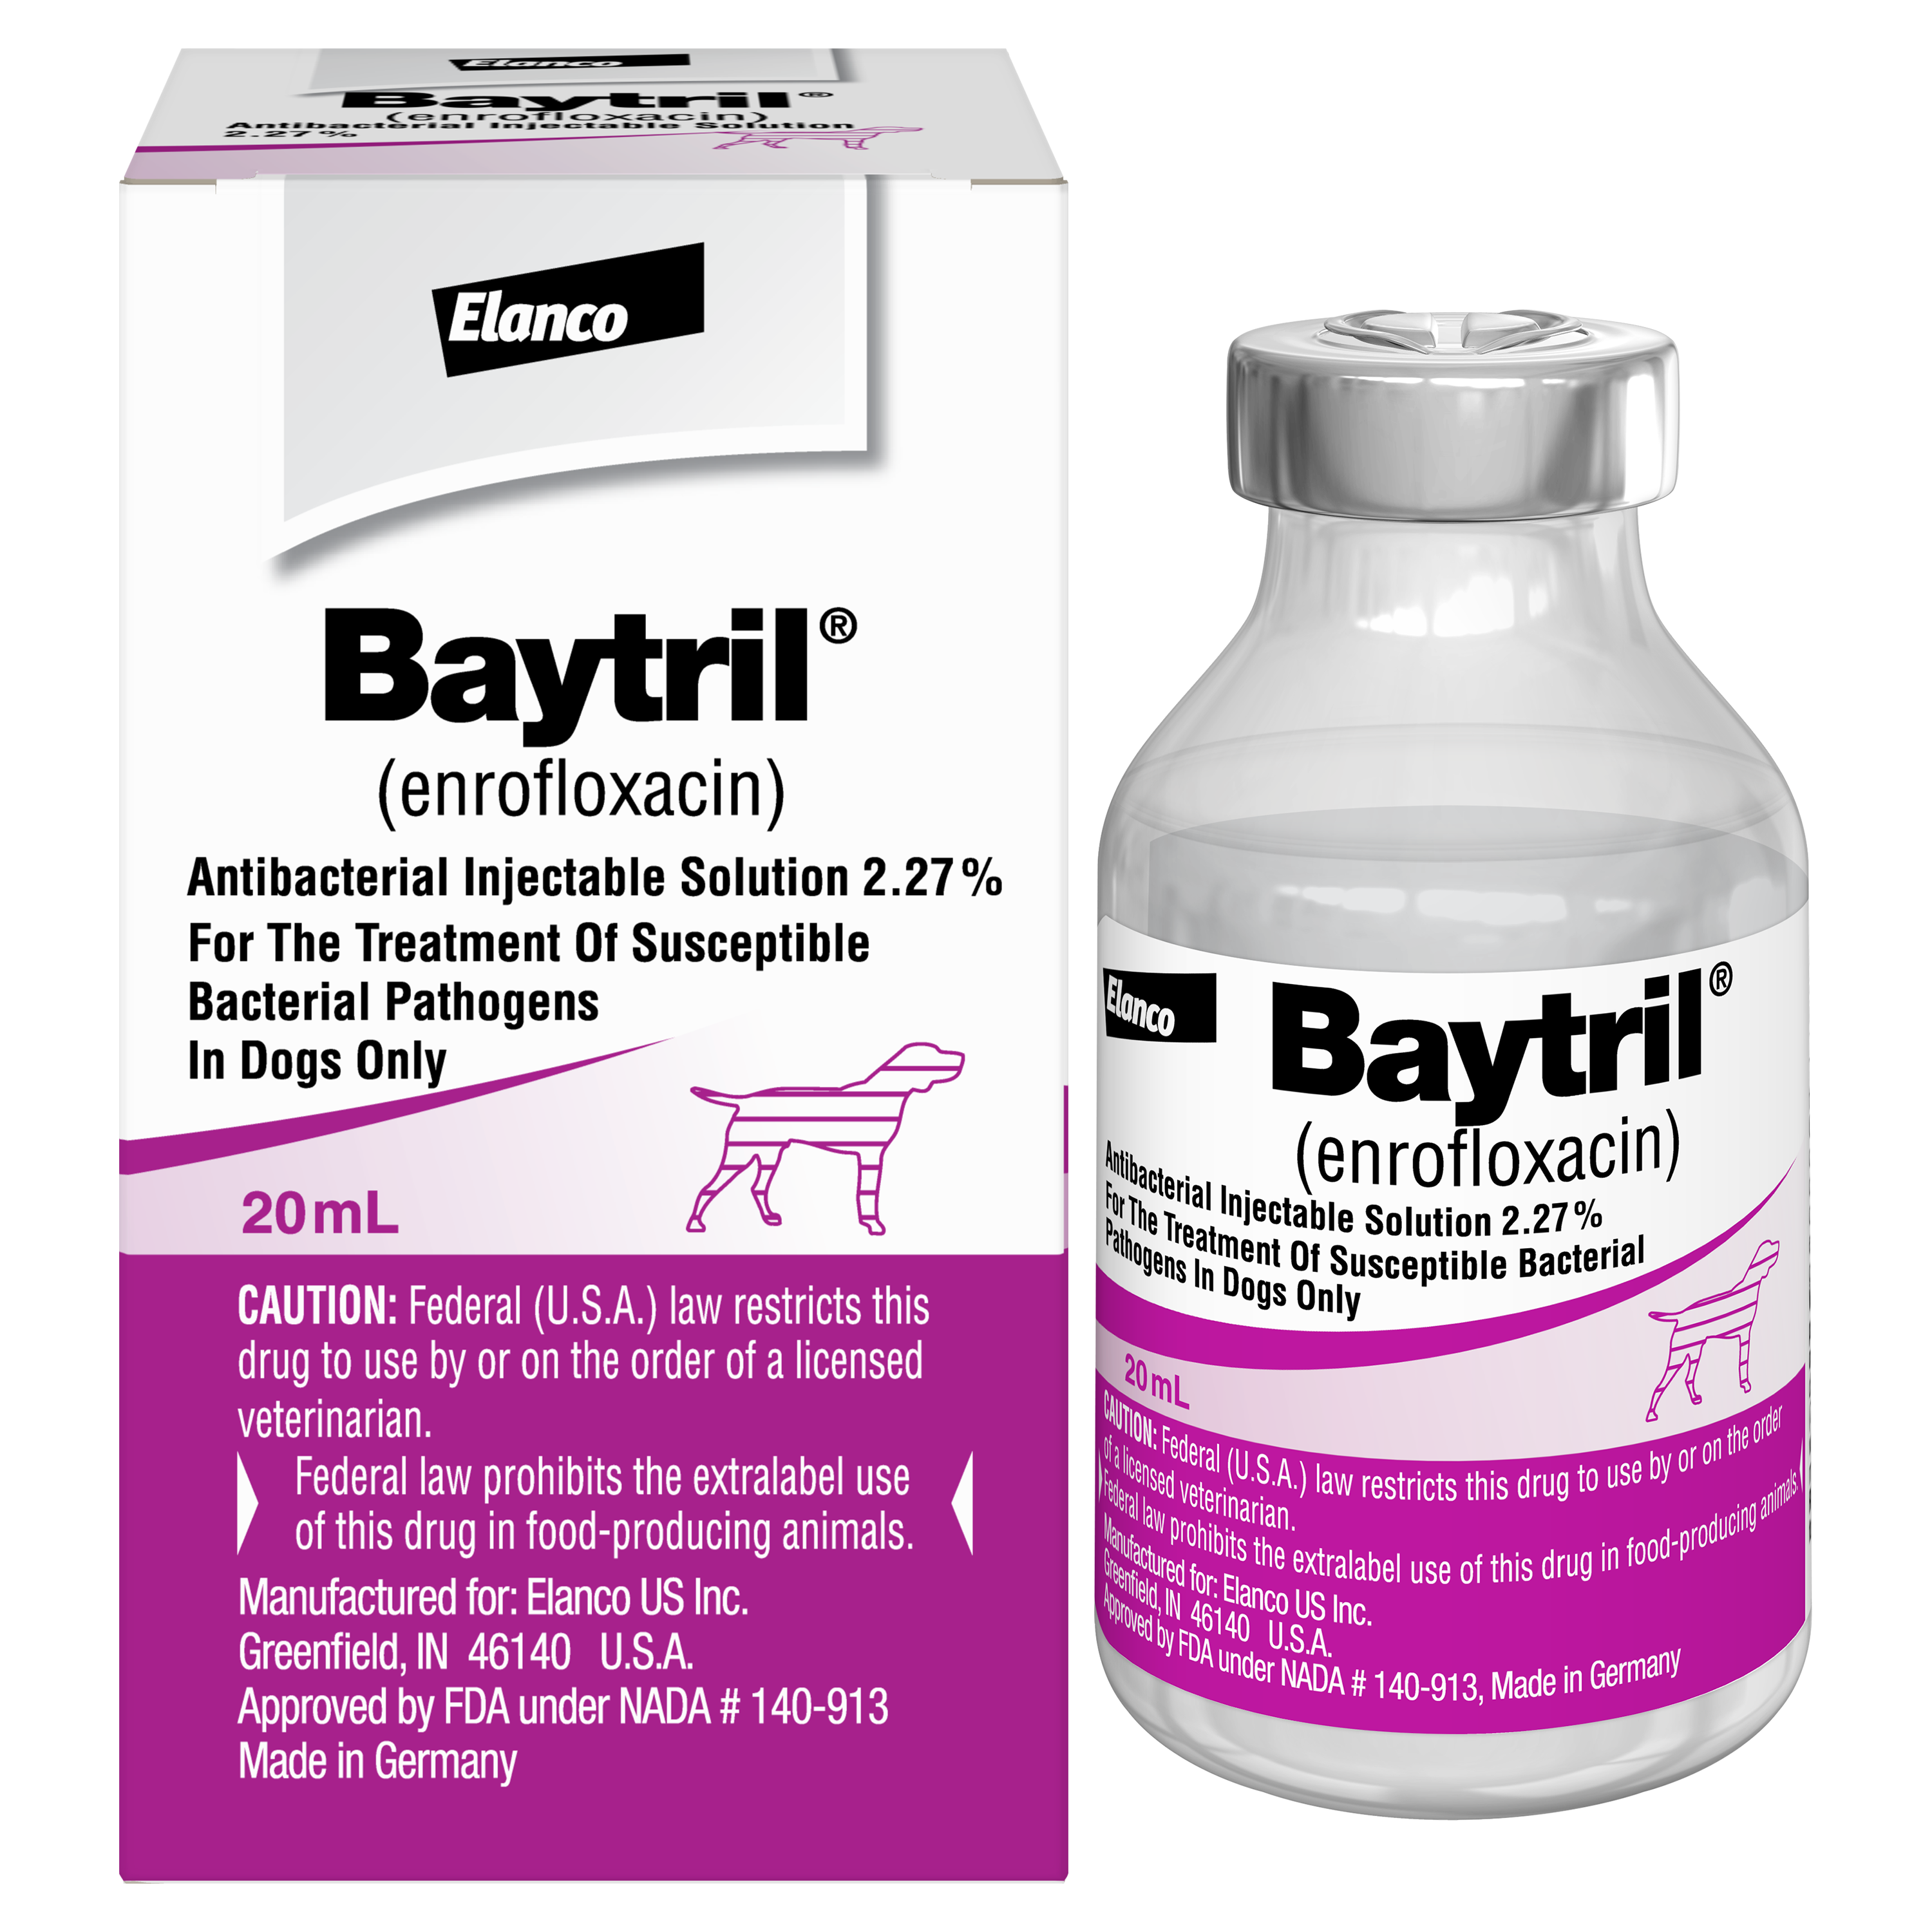 An image of a 20 ml bottle of Baytril injectable solution.